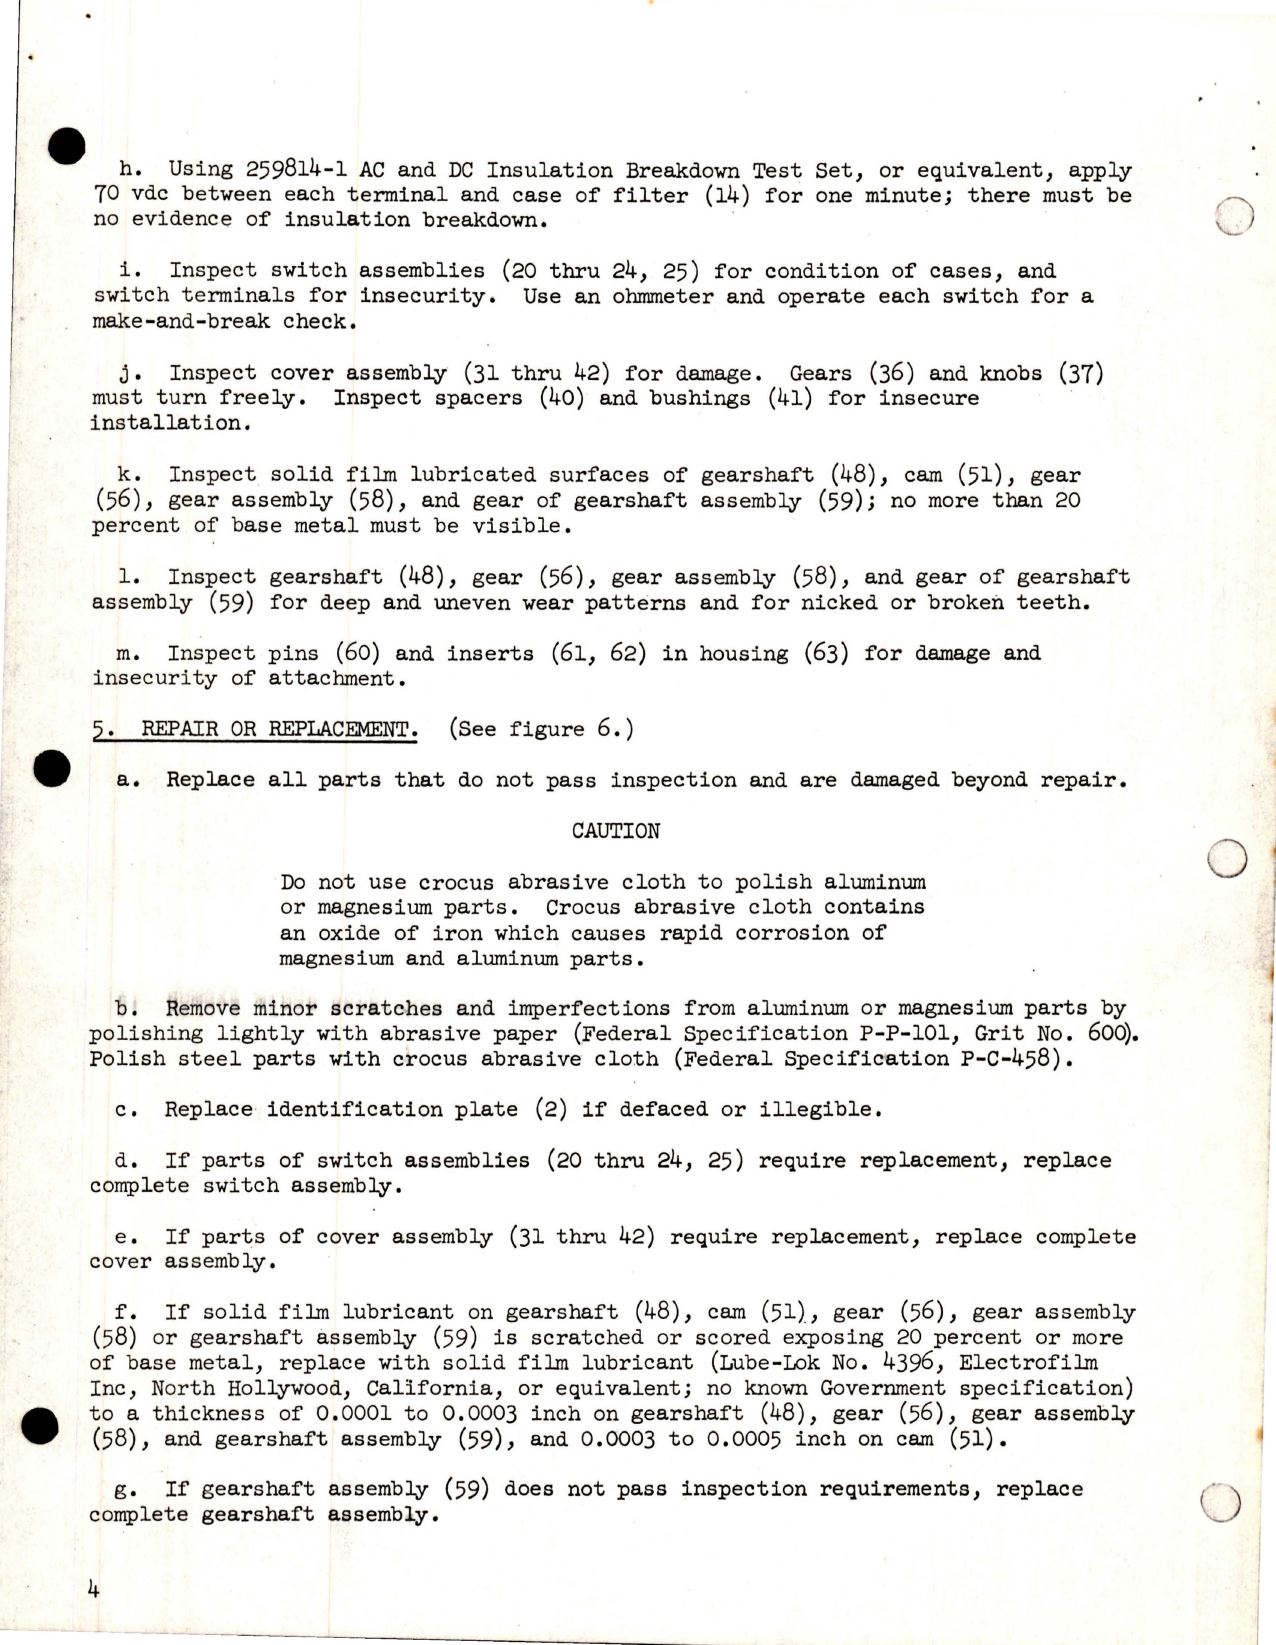 Sample page 9 from AirCorps Library document: Overhaul Instructions with Parts for Electromechanical Rotary Actuator - Part 541214-1-2 